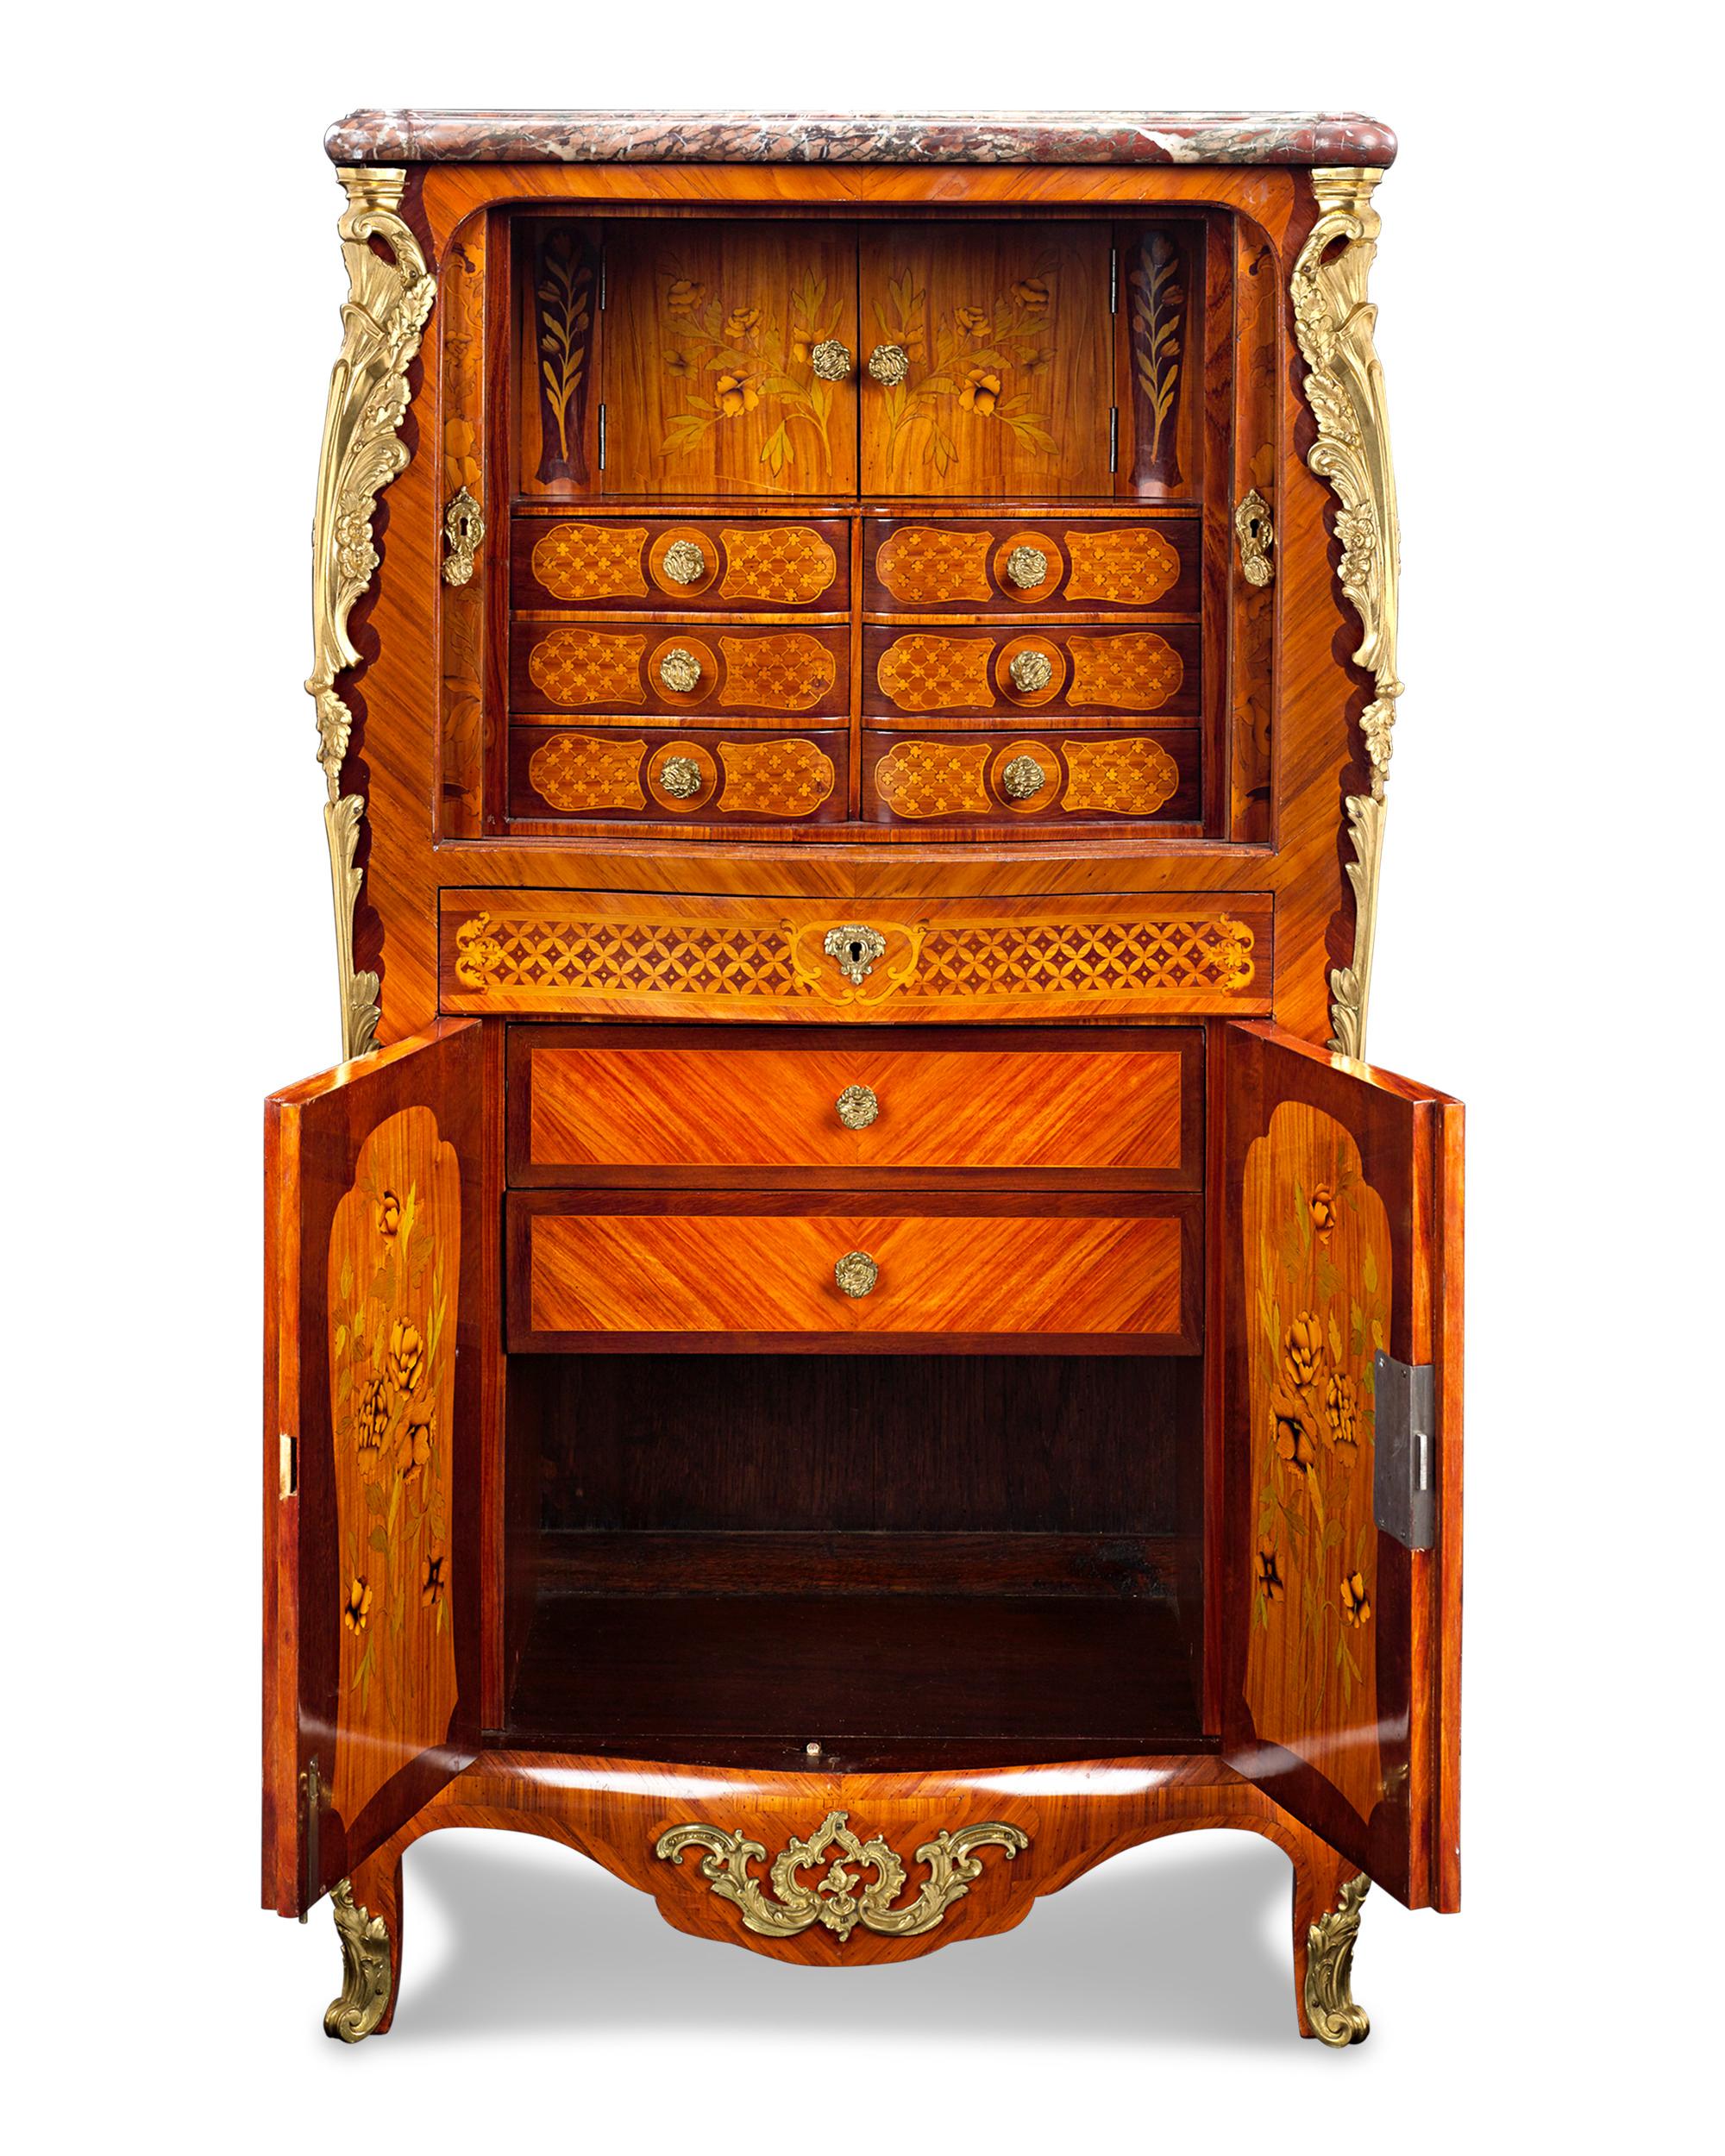 With its romantic flourishes and curves, this 19th century French secretaire illustrates the very best elements of Louis XV-style furniture. Meticulously crafted, the writing cabinet immediately presents itself as a work of art, enveloped in floral